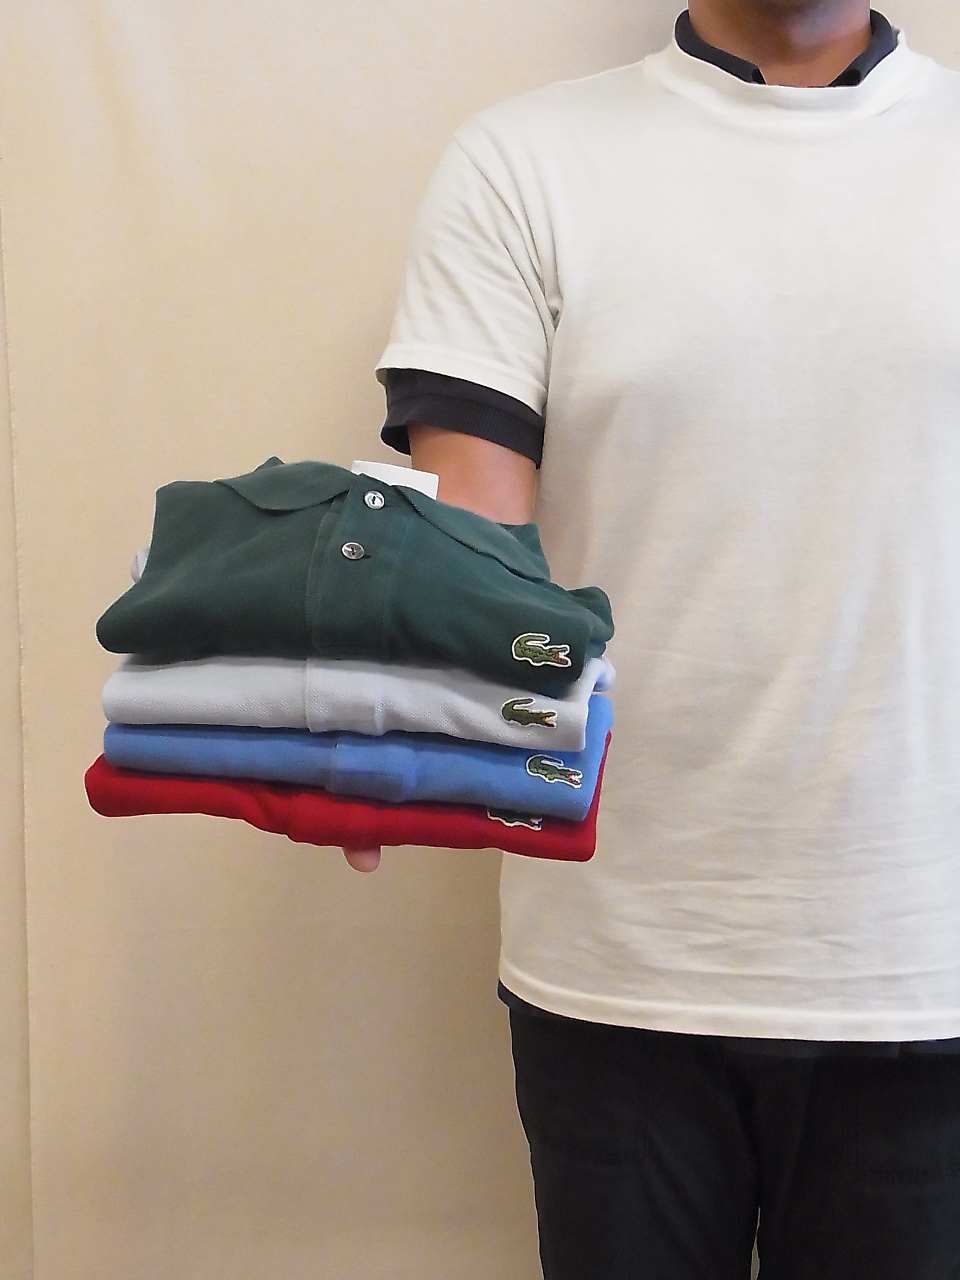 70s-french-lacoste-20150715-1